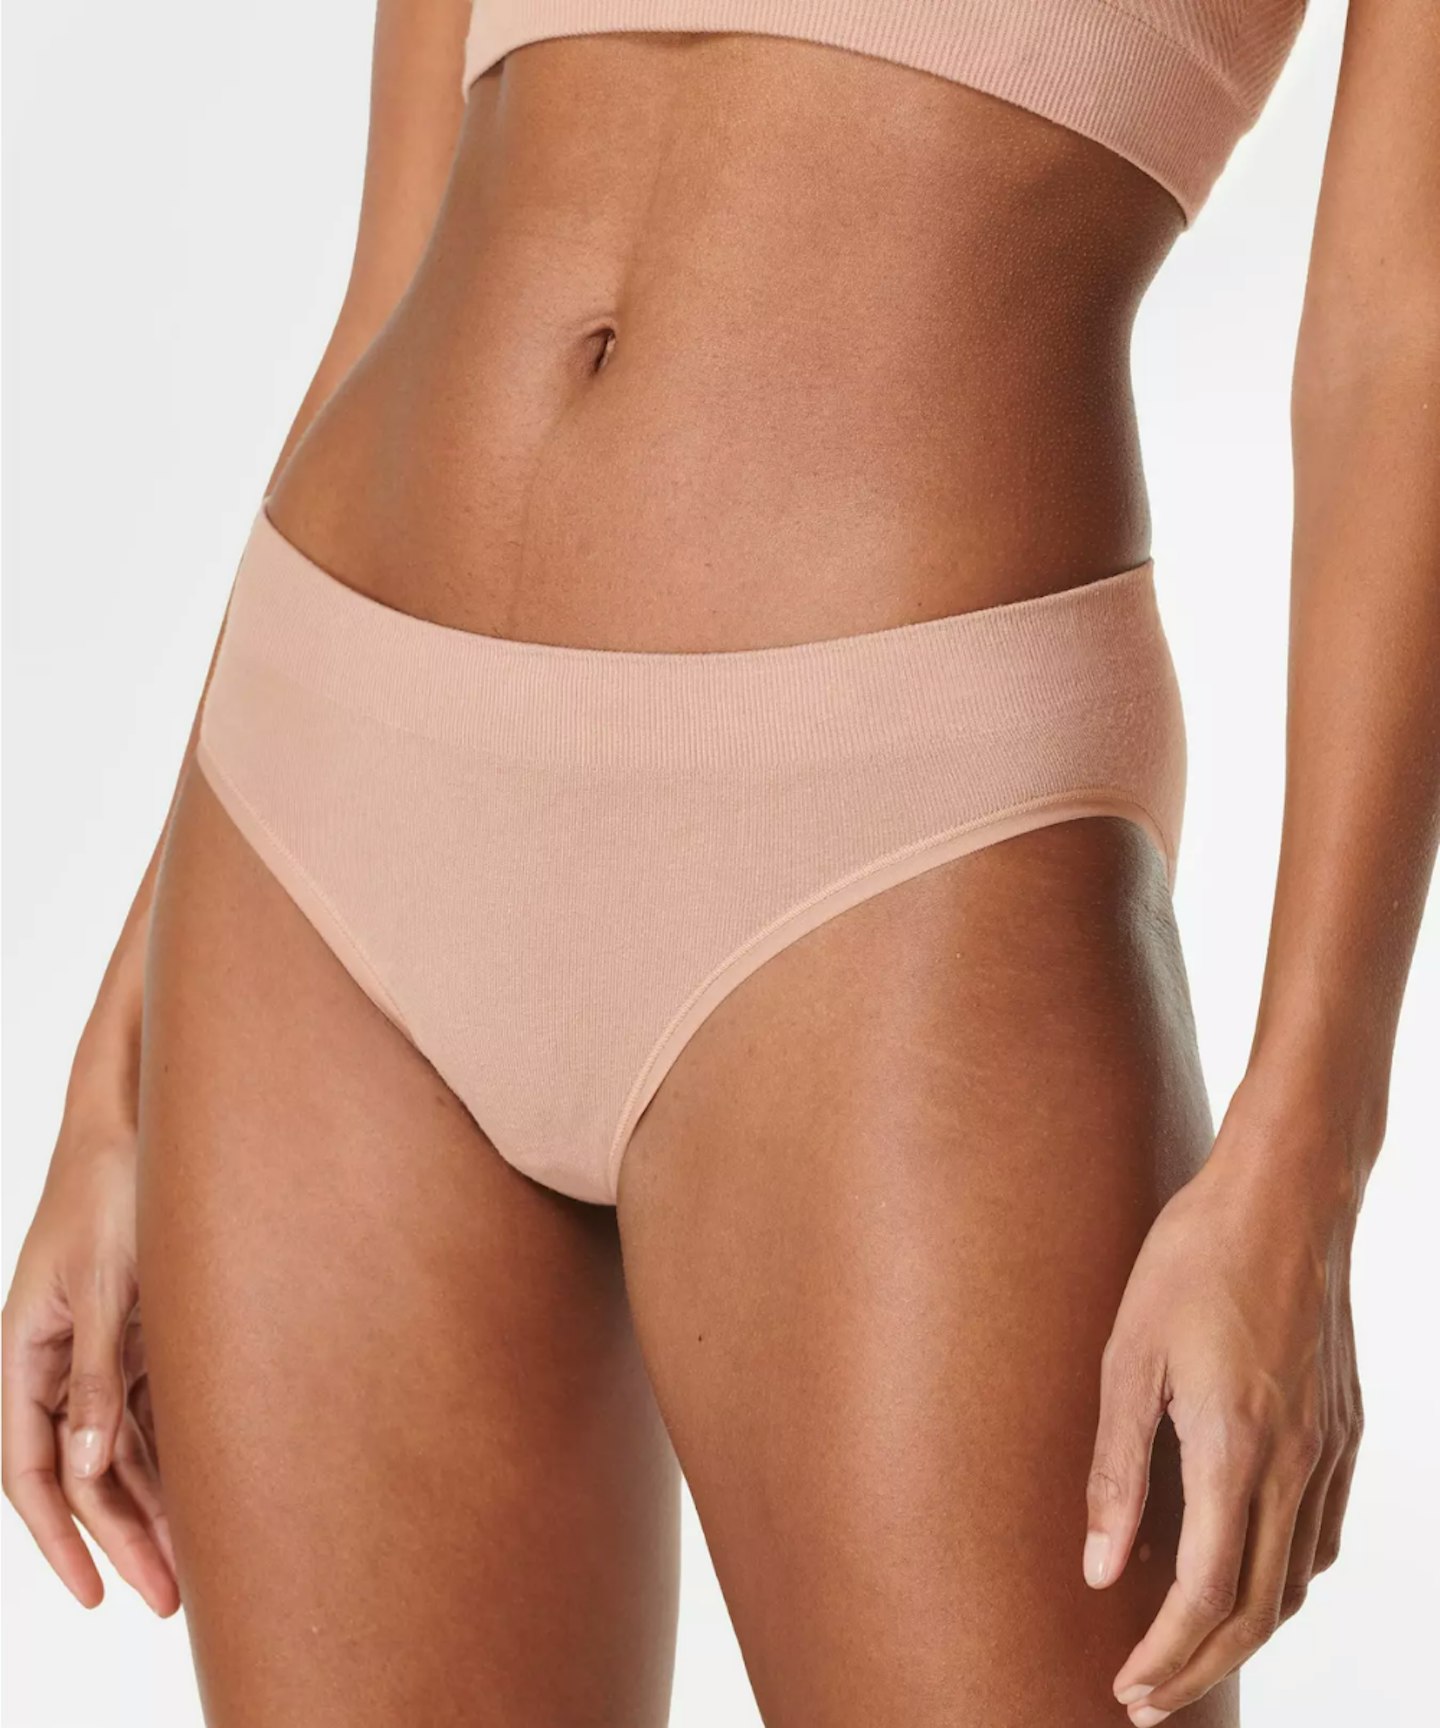 Workout Underwear: What Knickers Should You Be Wearing To The Gym?